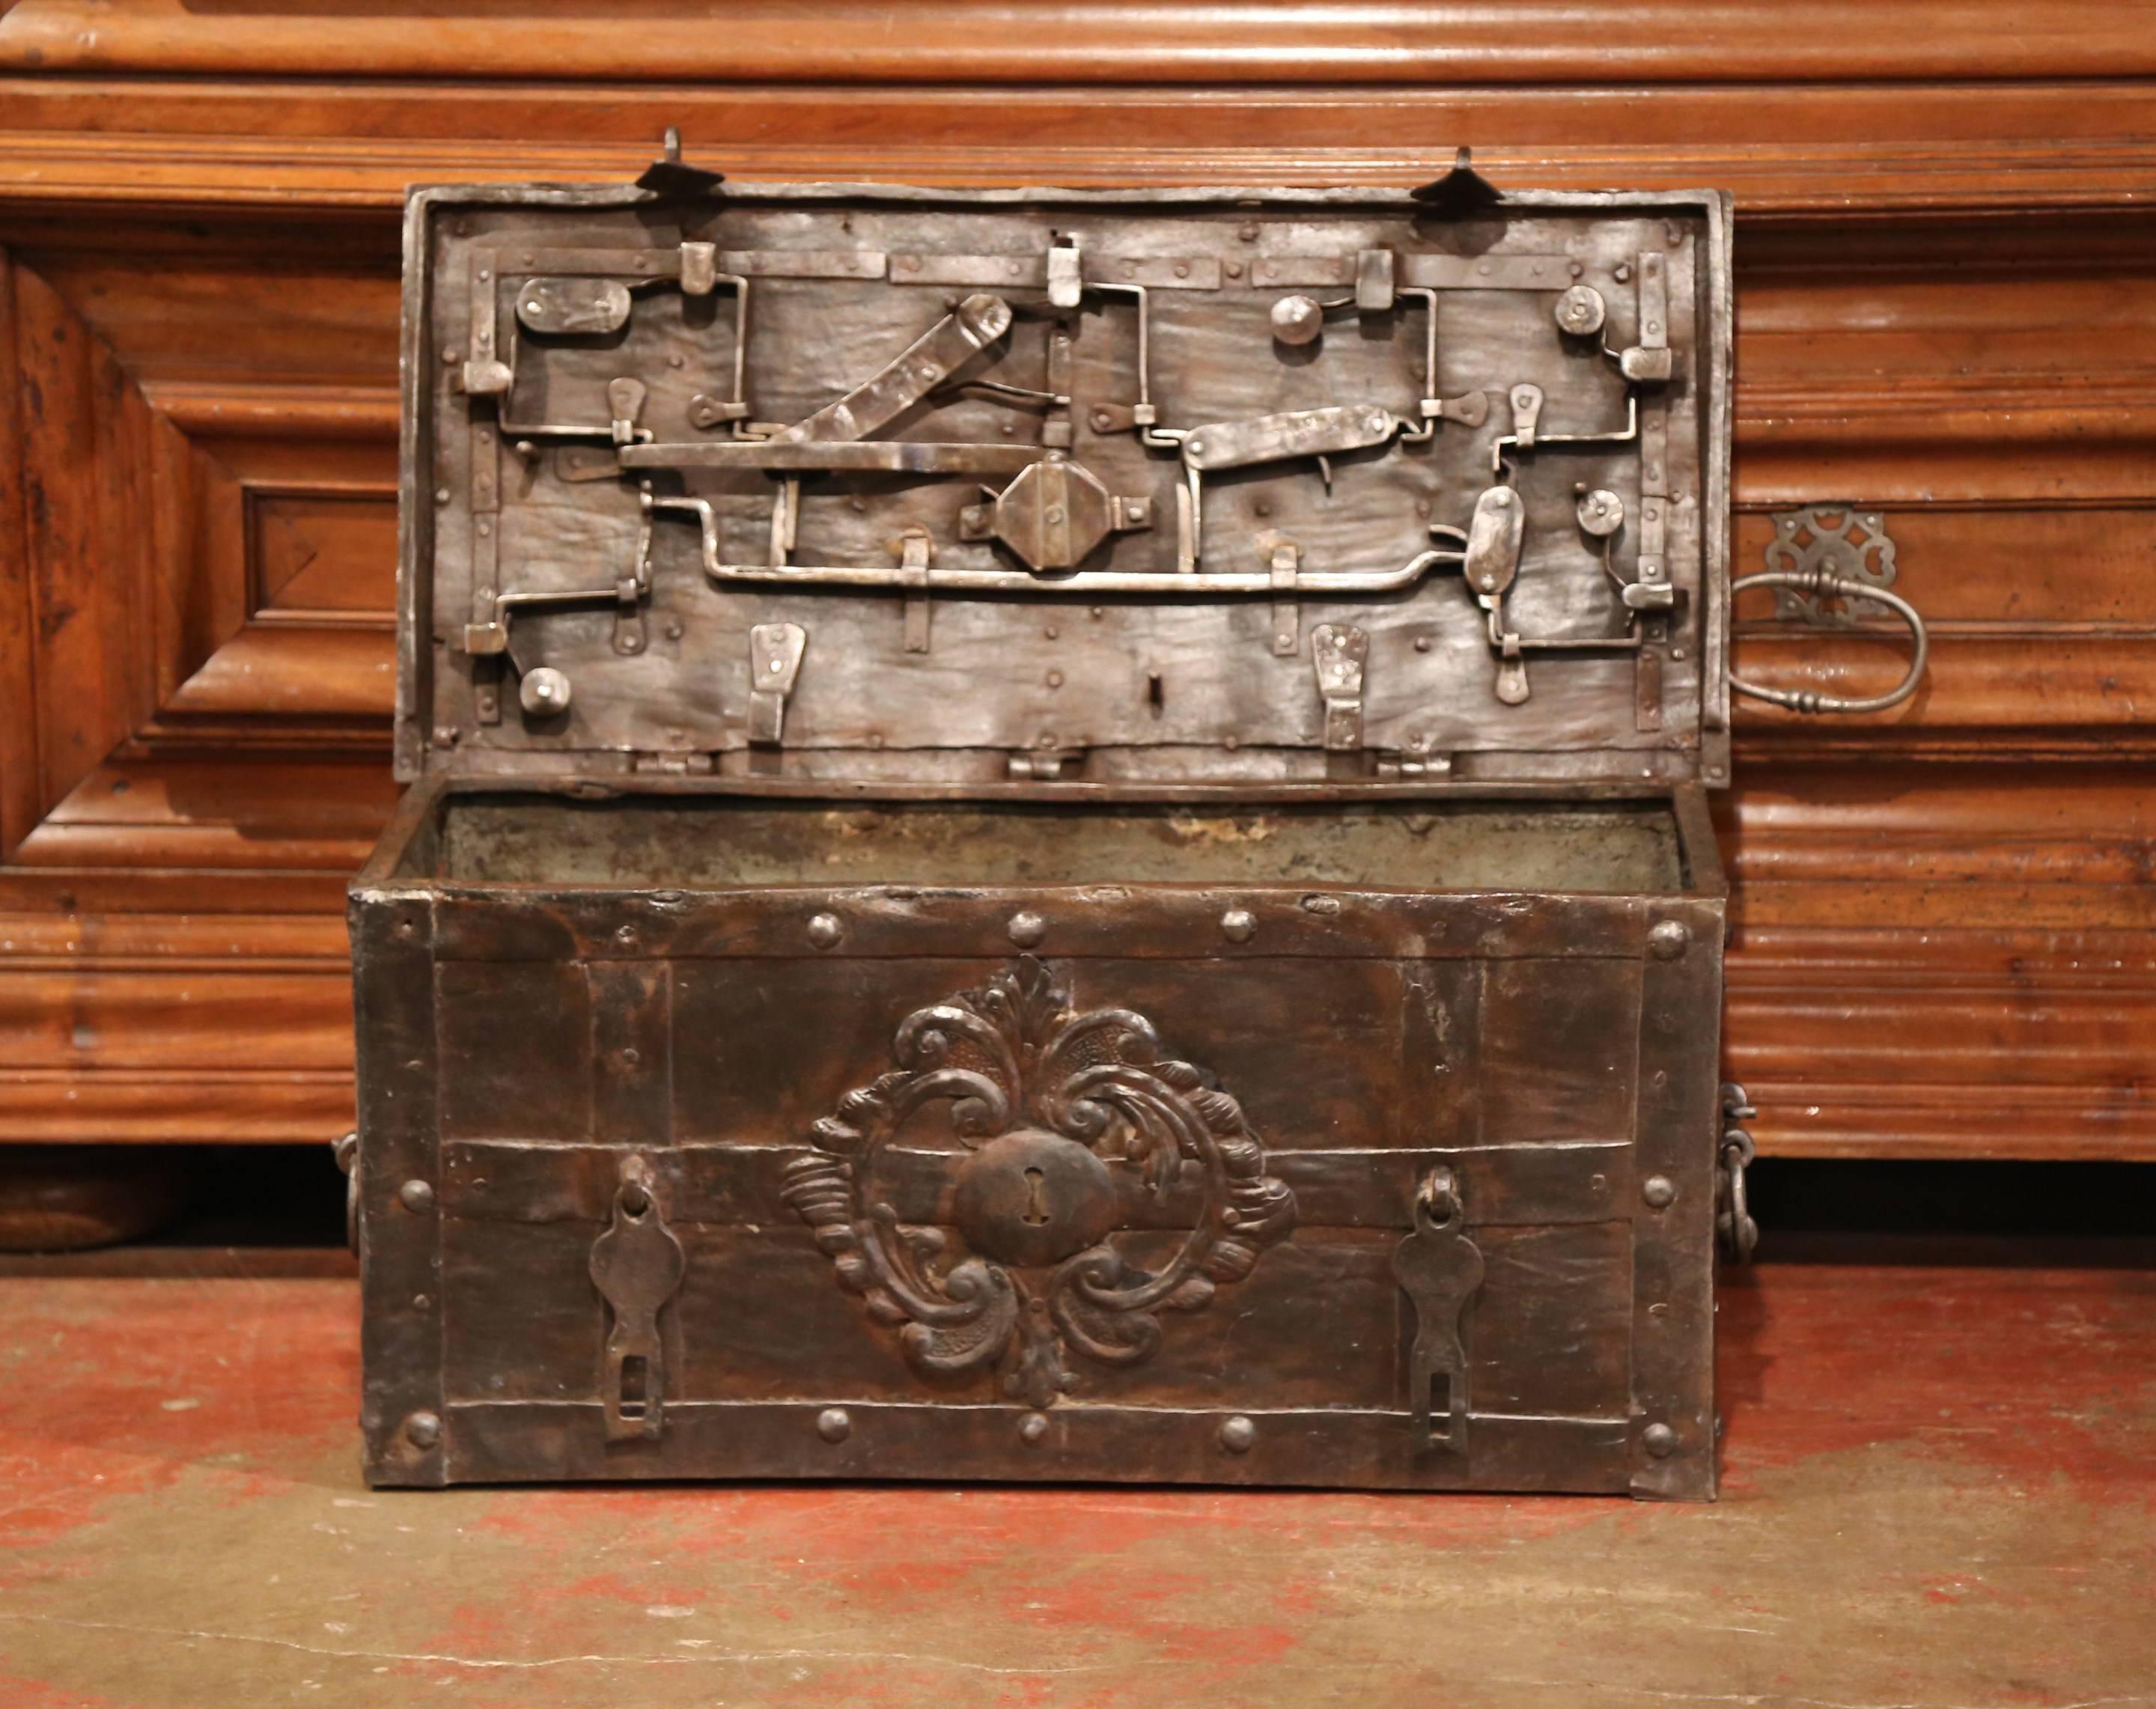 Crafted in Germany, circa 1690, the safe called a 